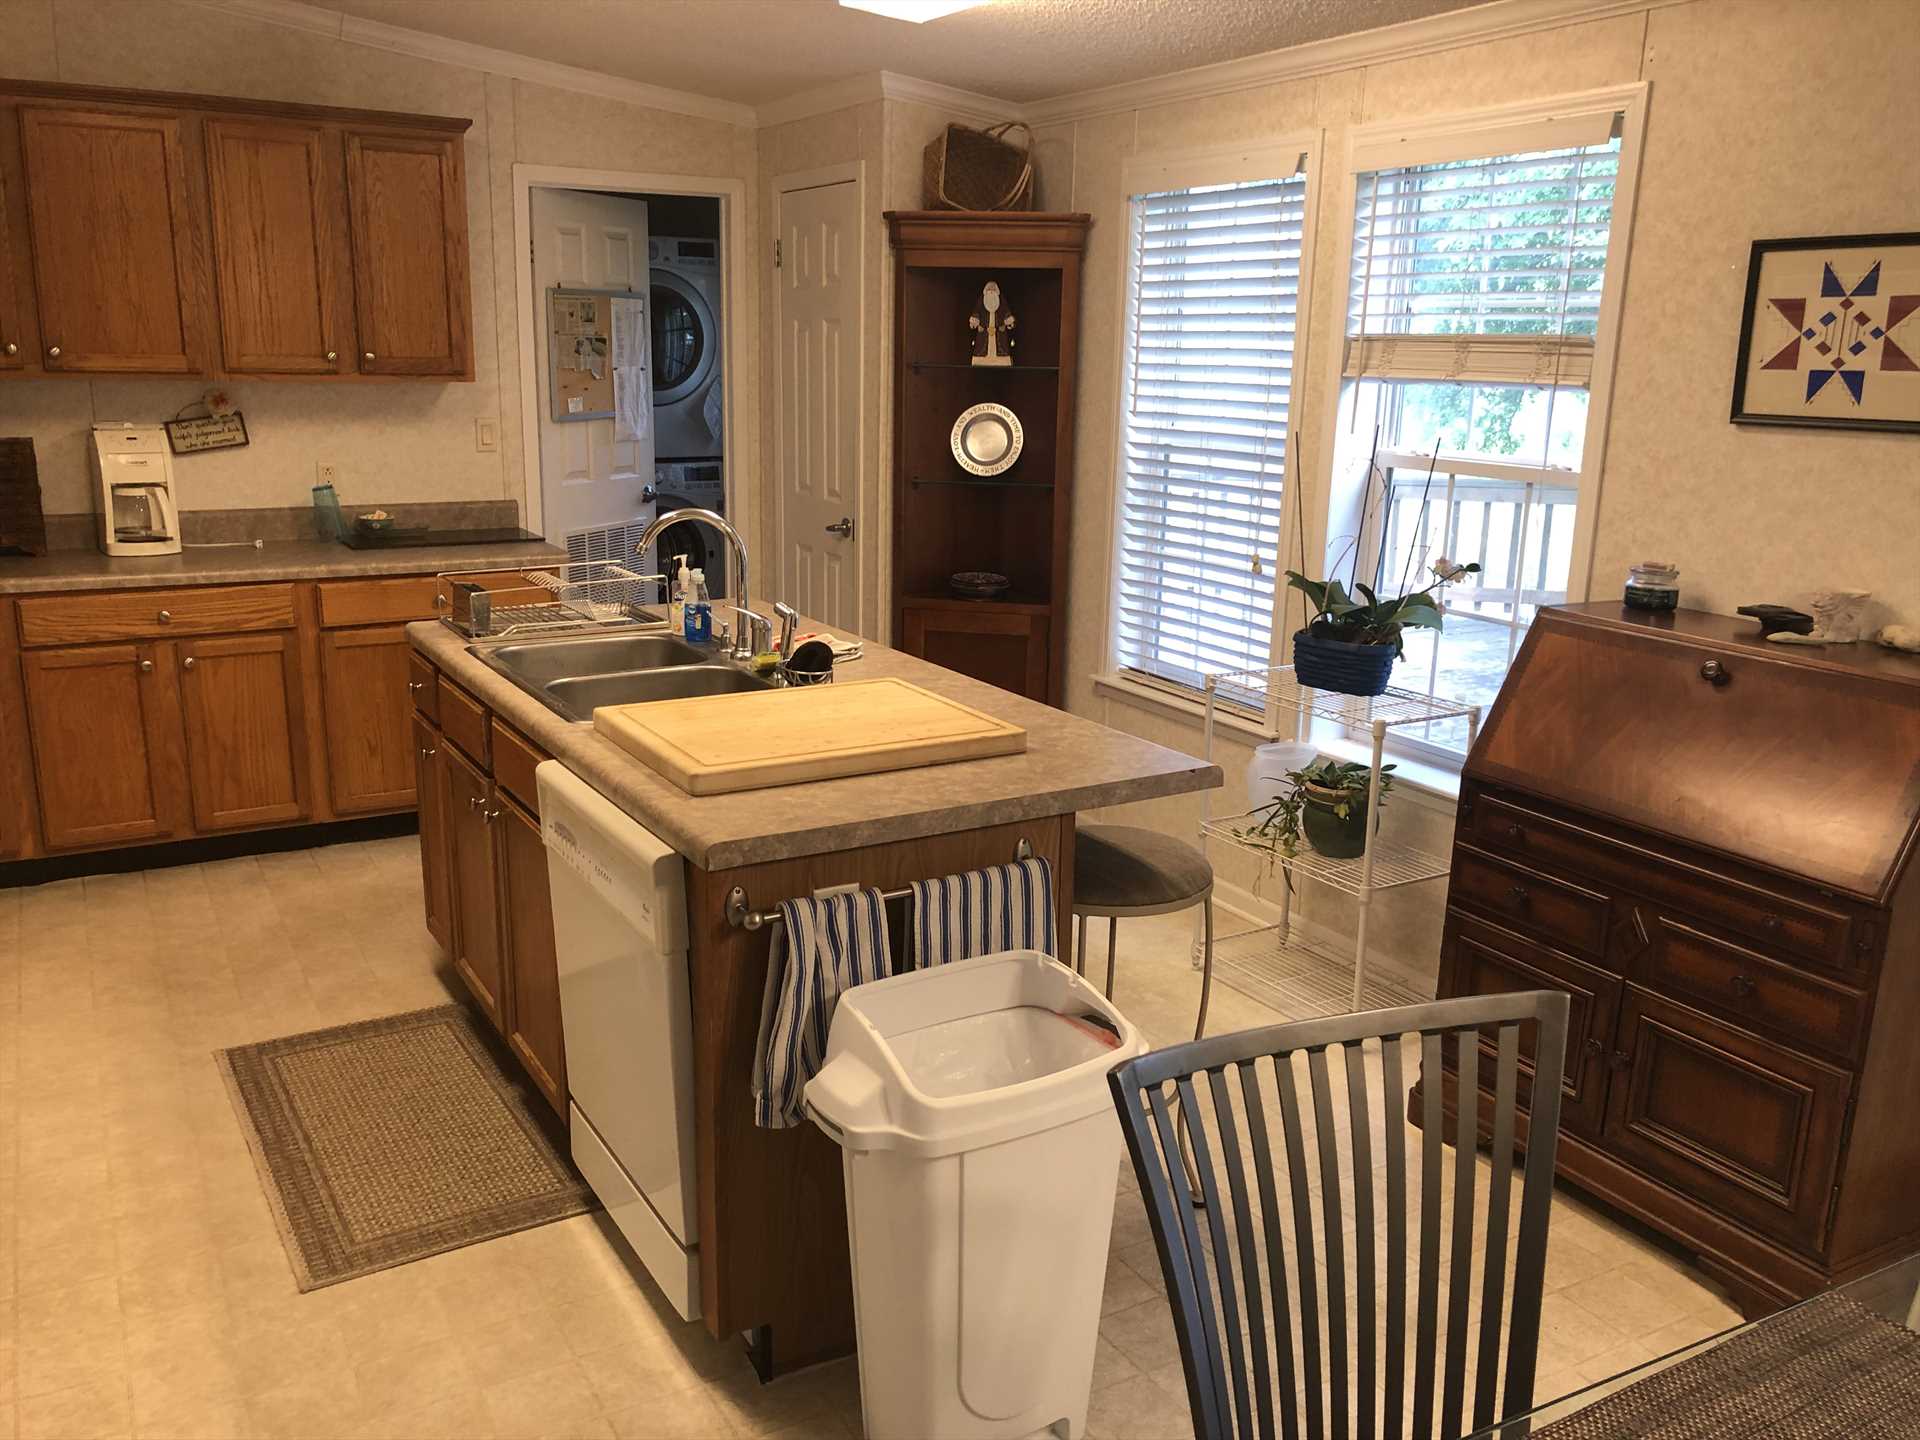                                                 Beyond the fully-appointed kitchen, you'll see a new washer and dryer combo installed for your convenience!